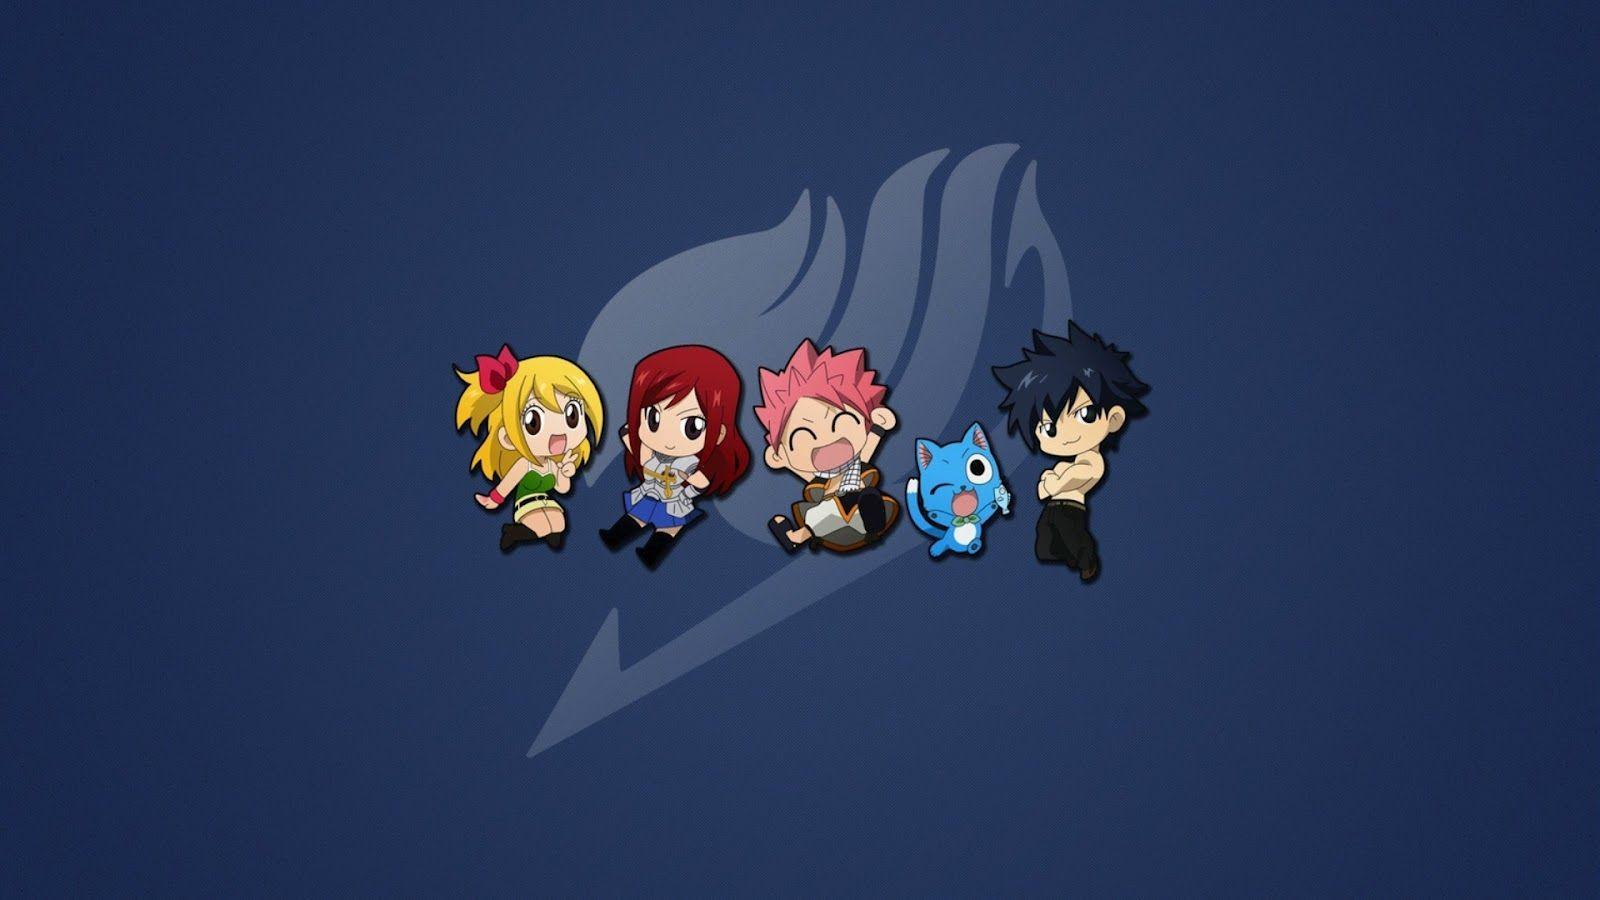 Fairy Tail wallpaper HD 2016. Wallpaper, Background, Image